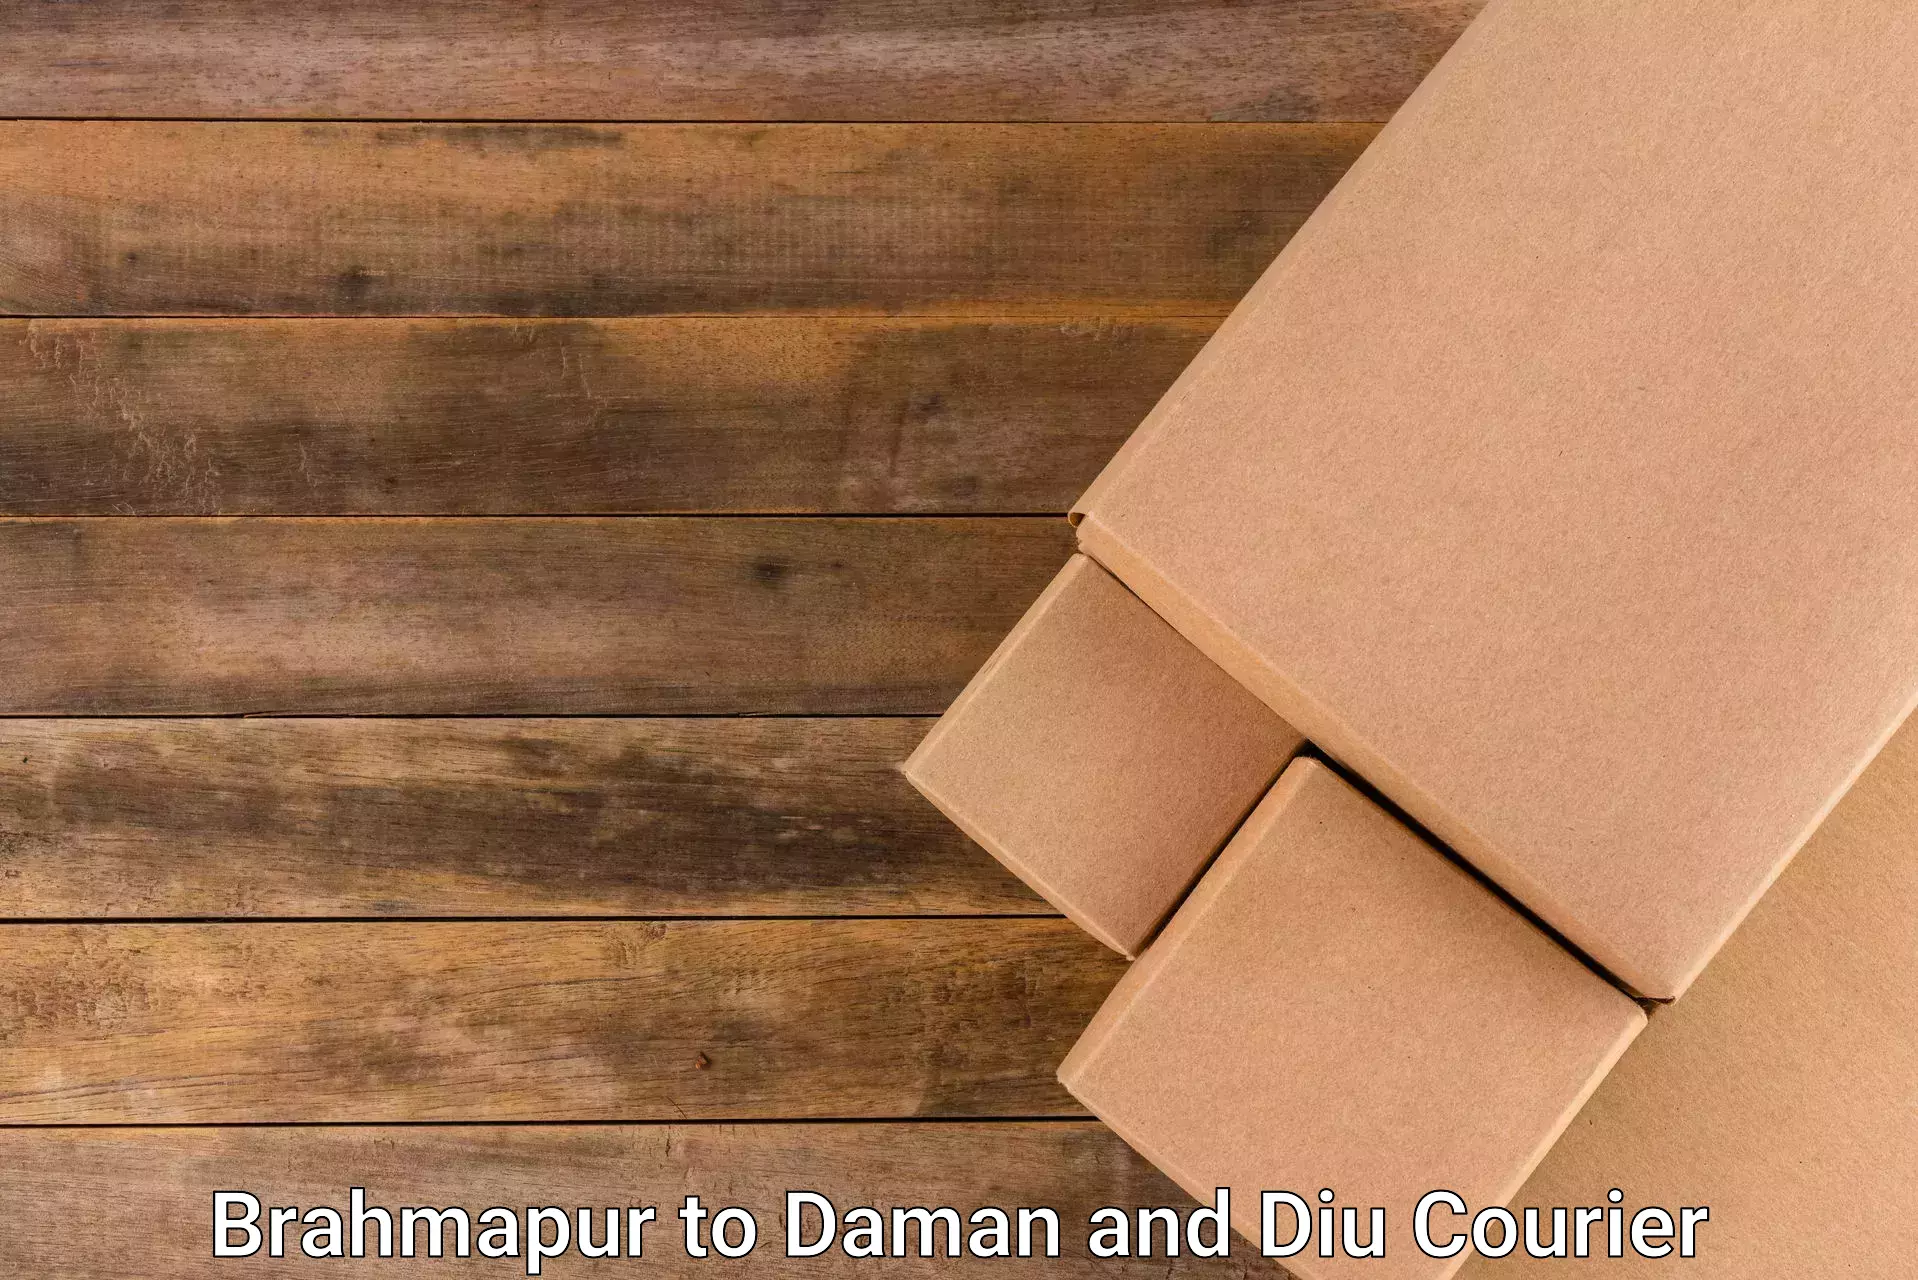 Large package courier Brahmapur to Diu